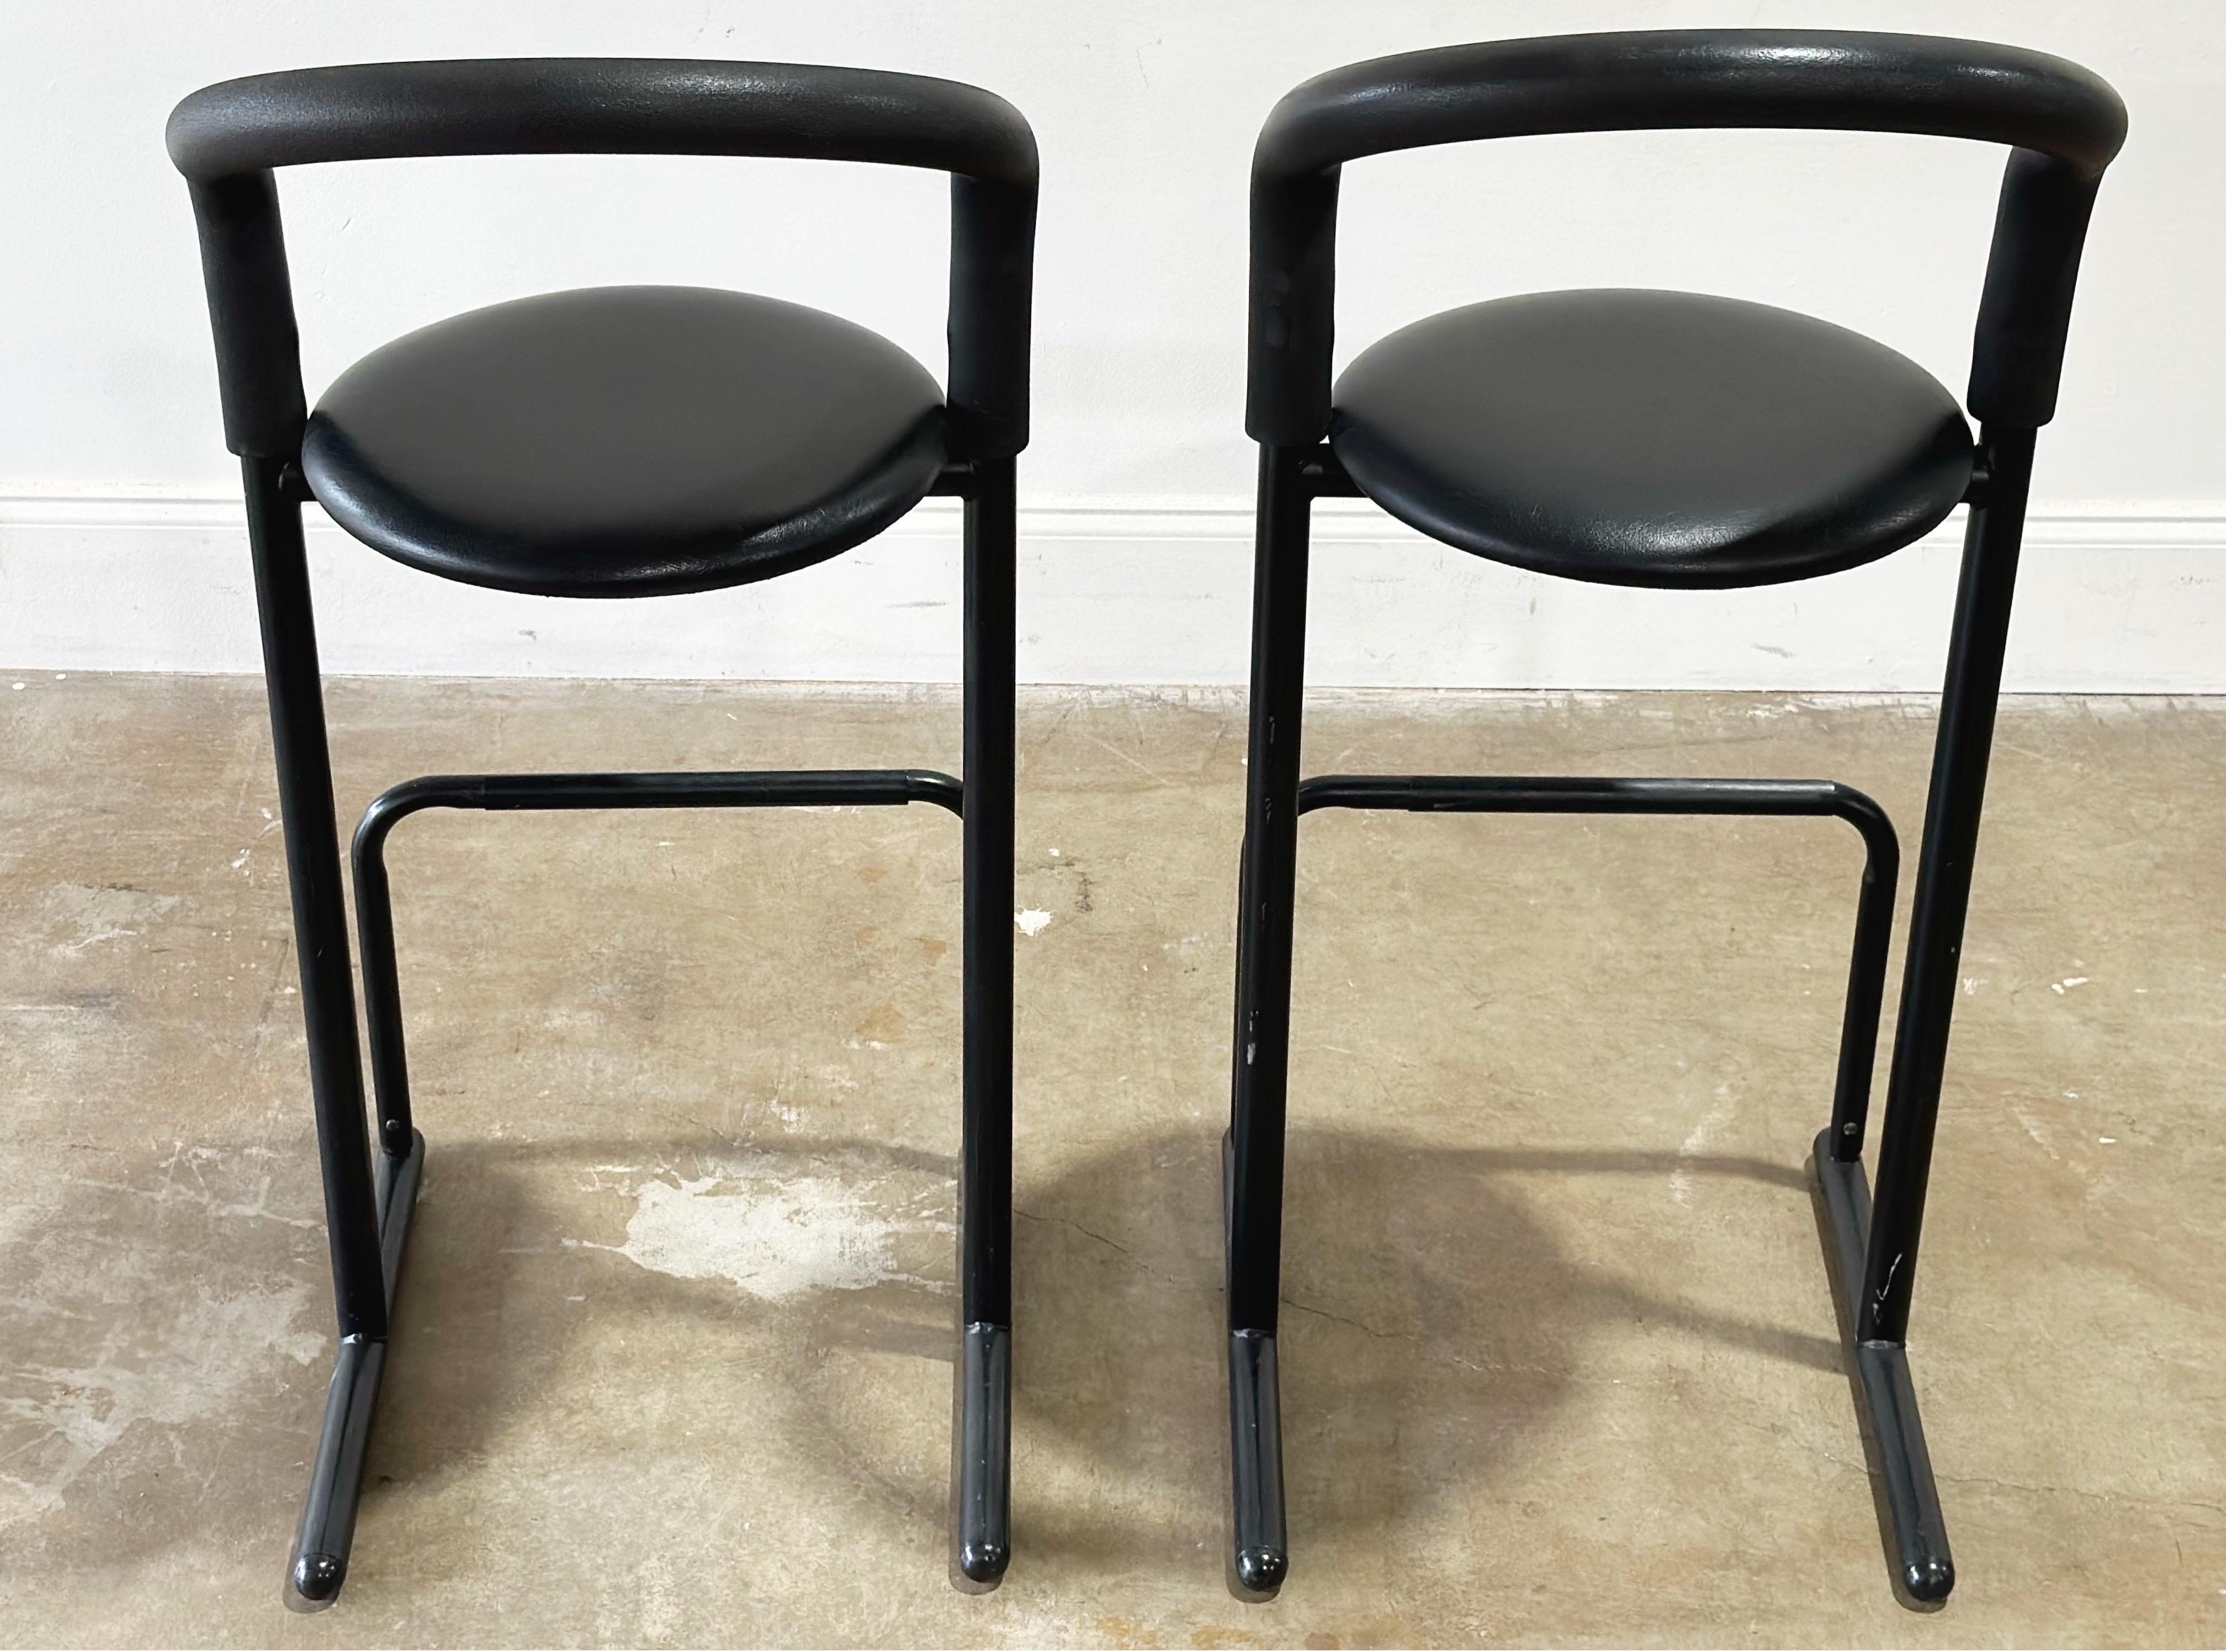 Pair Post Modern Barstools, Vintage 1980s Amisco Black Bar Stools, Bar Height In Good Condition For Sale In Decatur, GA